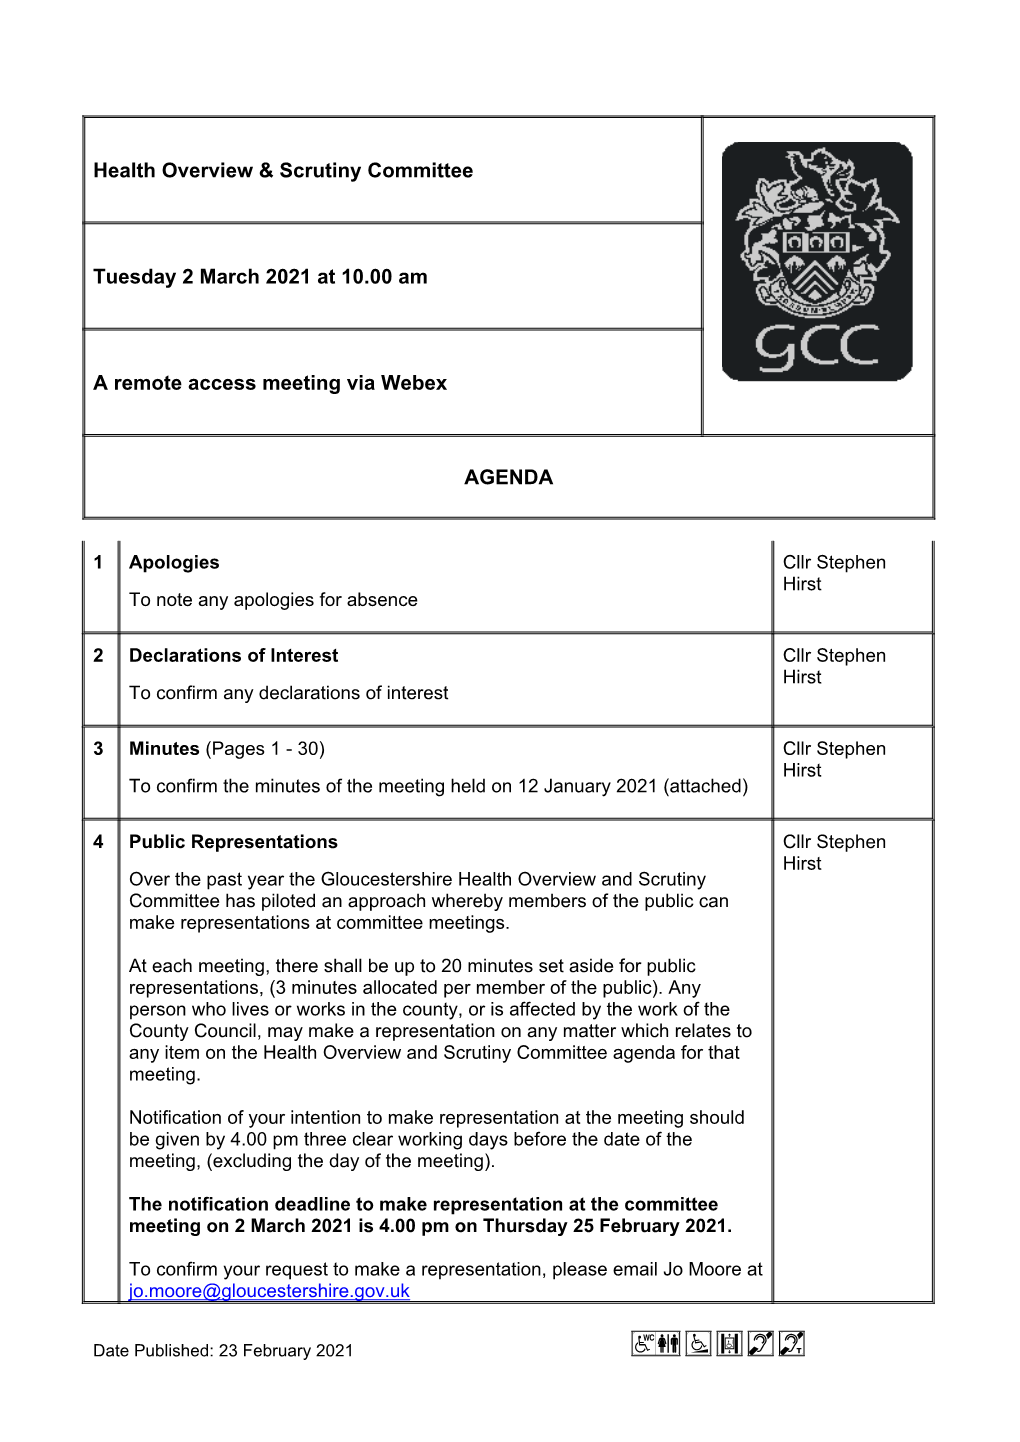 Agenda Document for Health Overview & Scrutiny Committee, 02